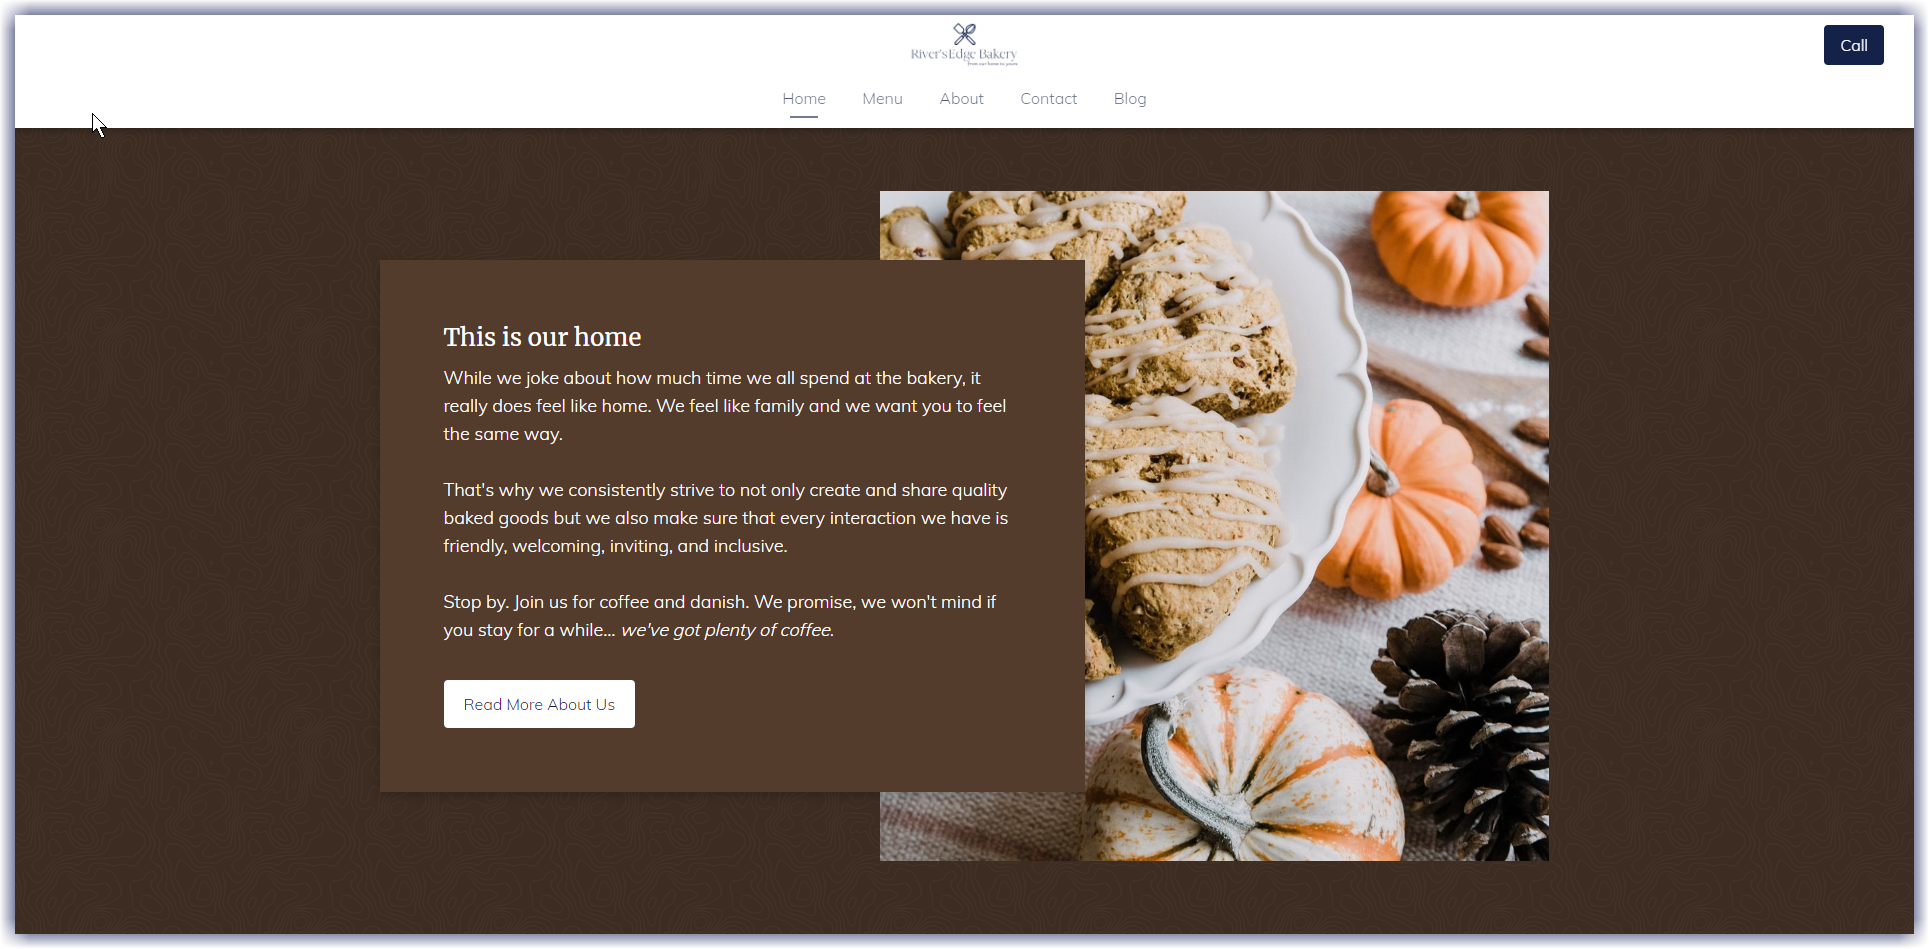 Example of a website page decorated for the fall with autumnal colors and imagery